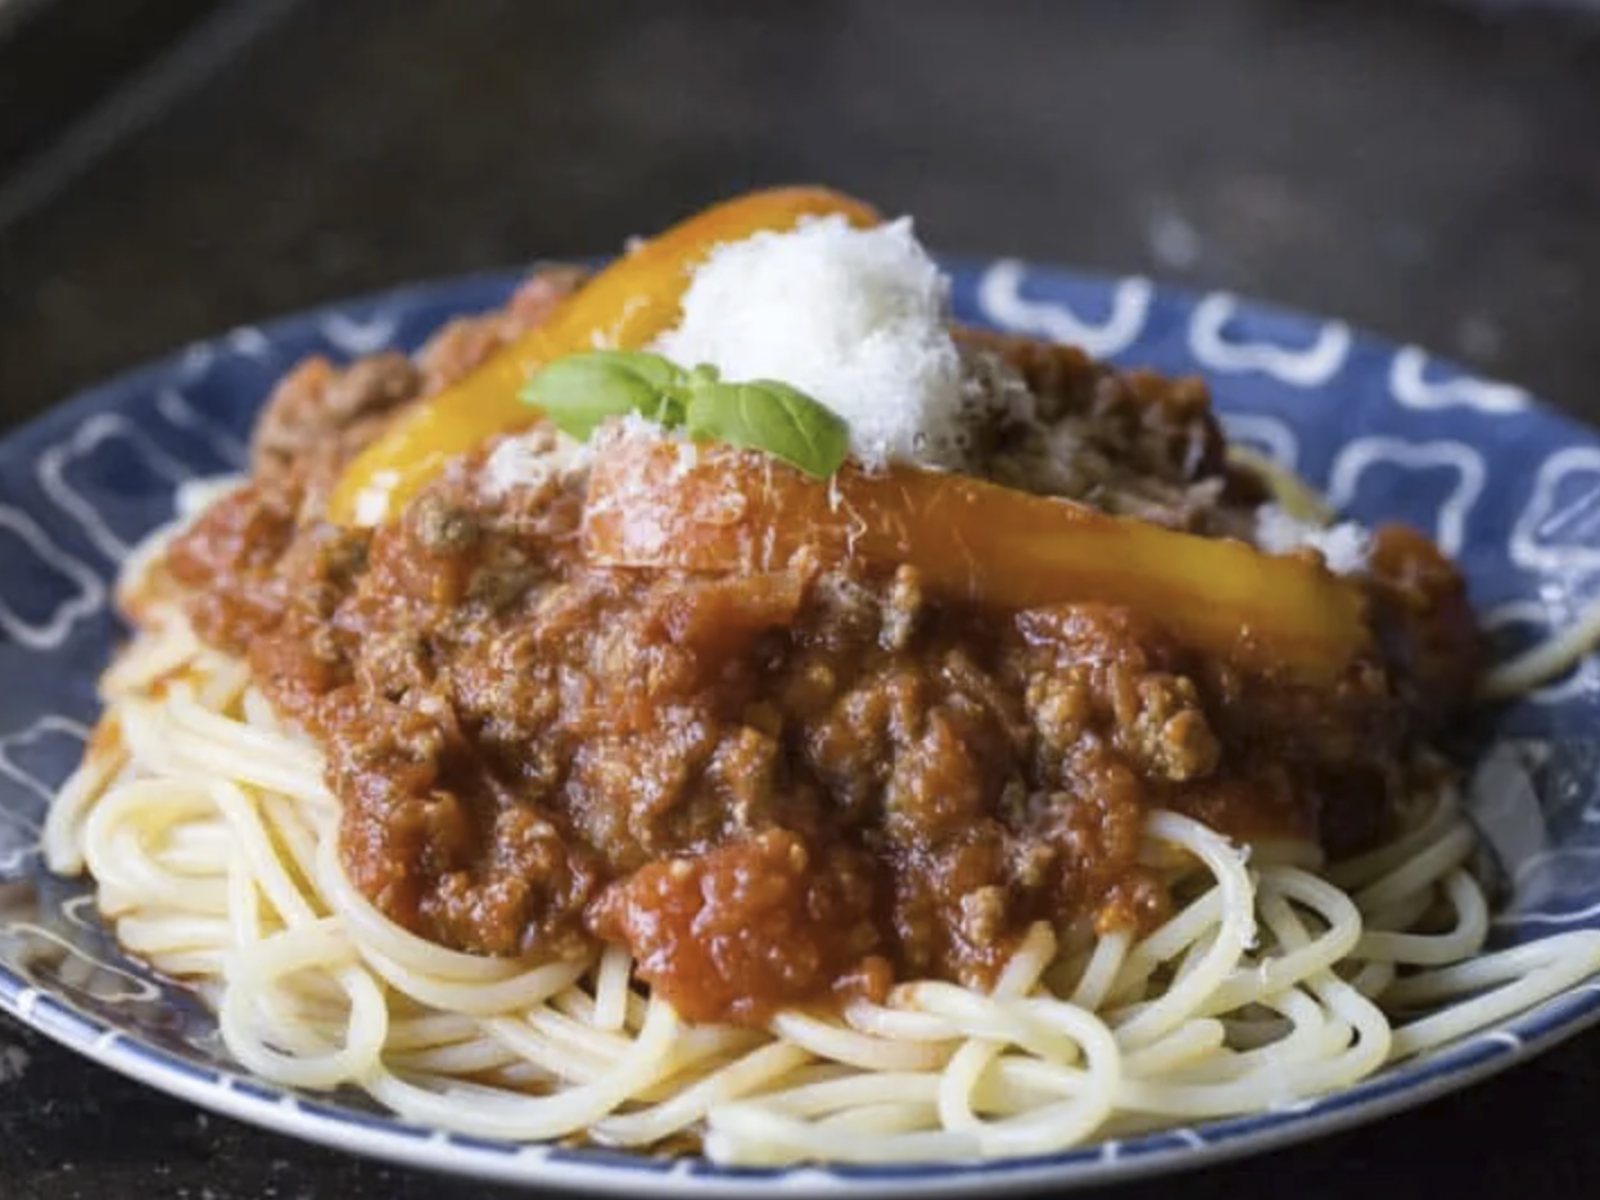 bison bolognese in a bowl